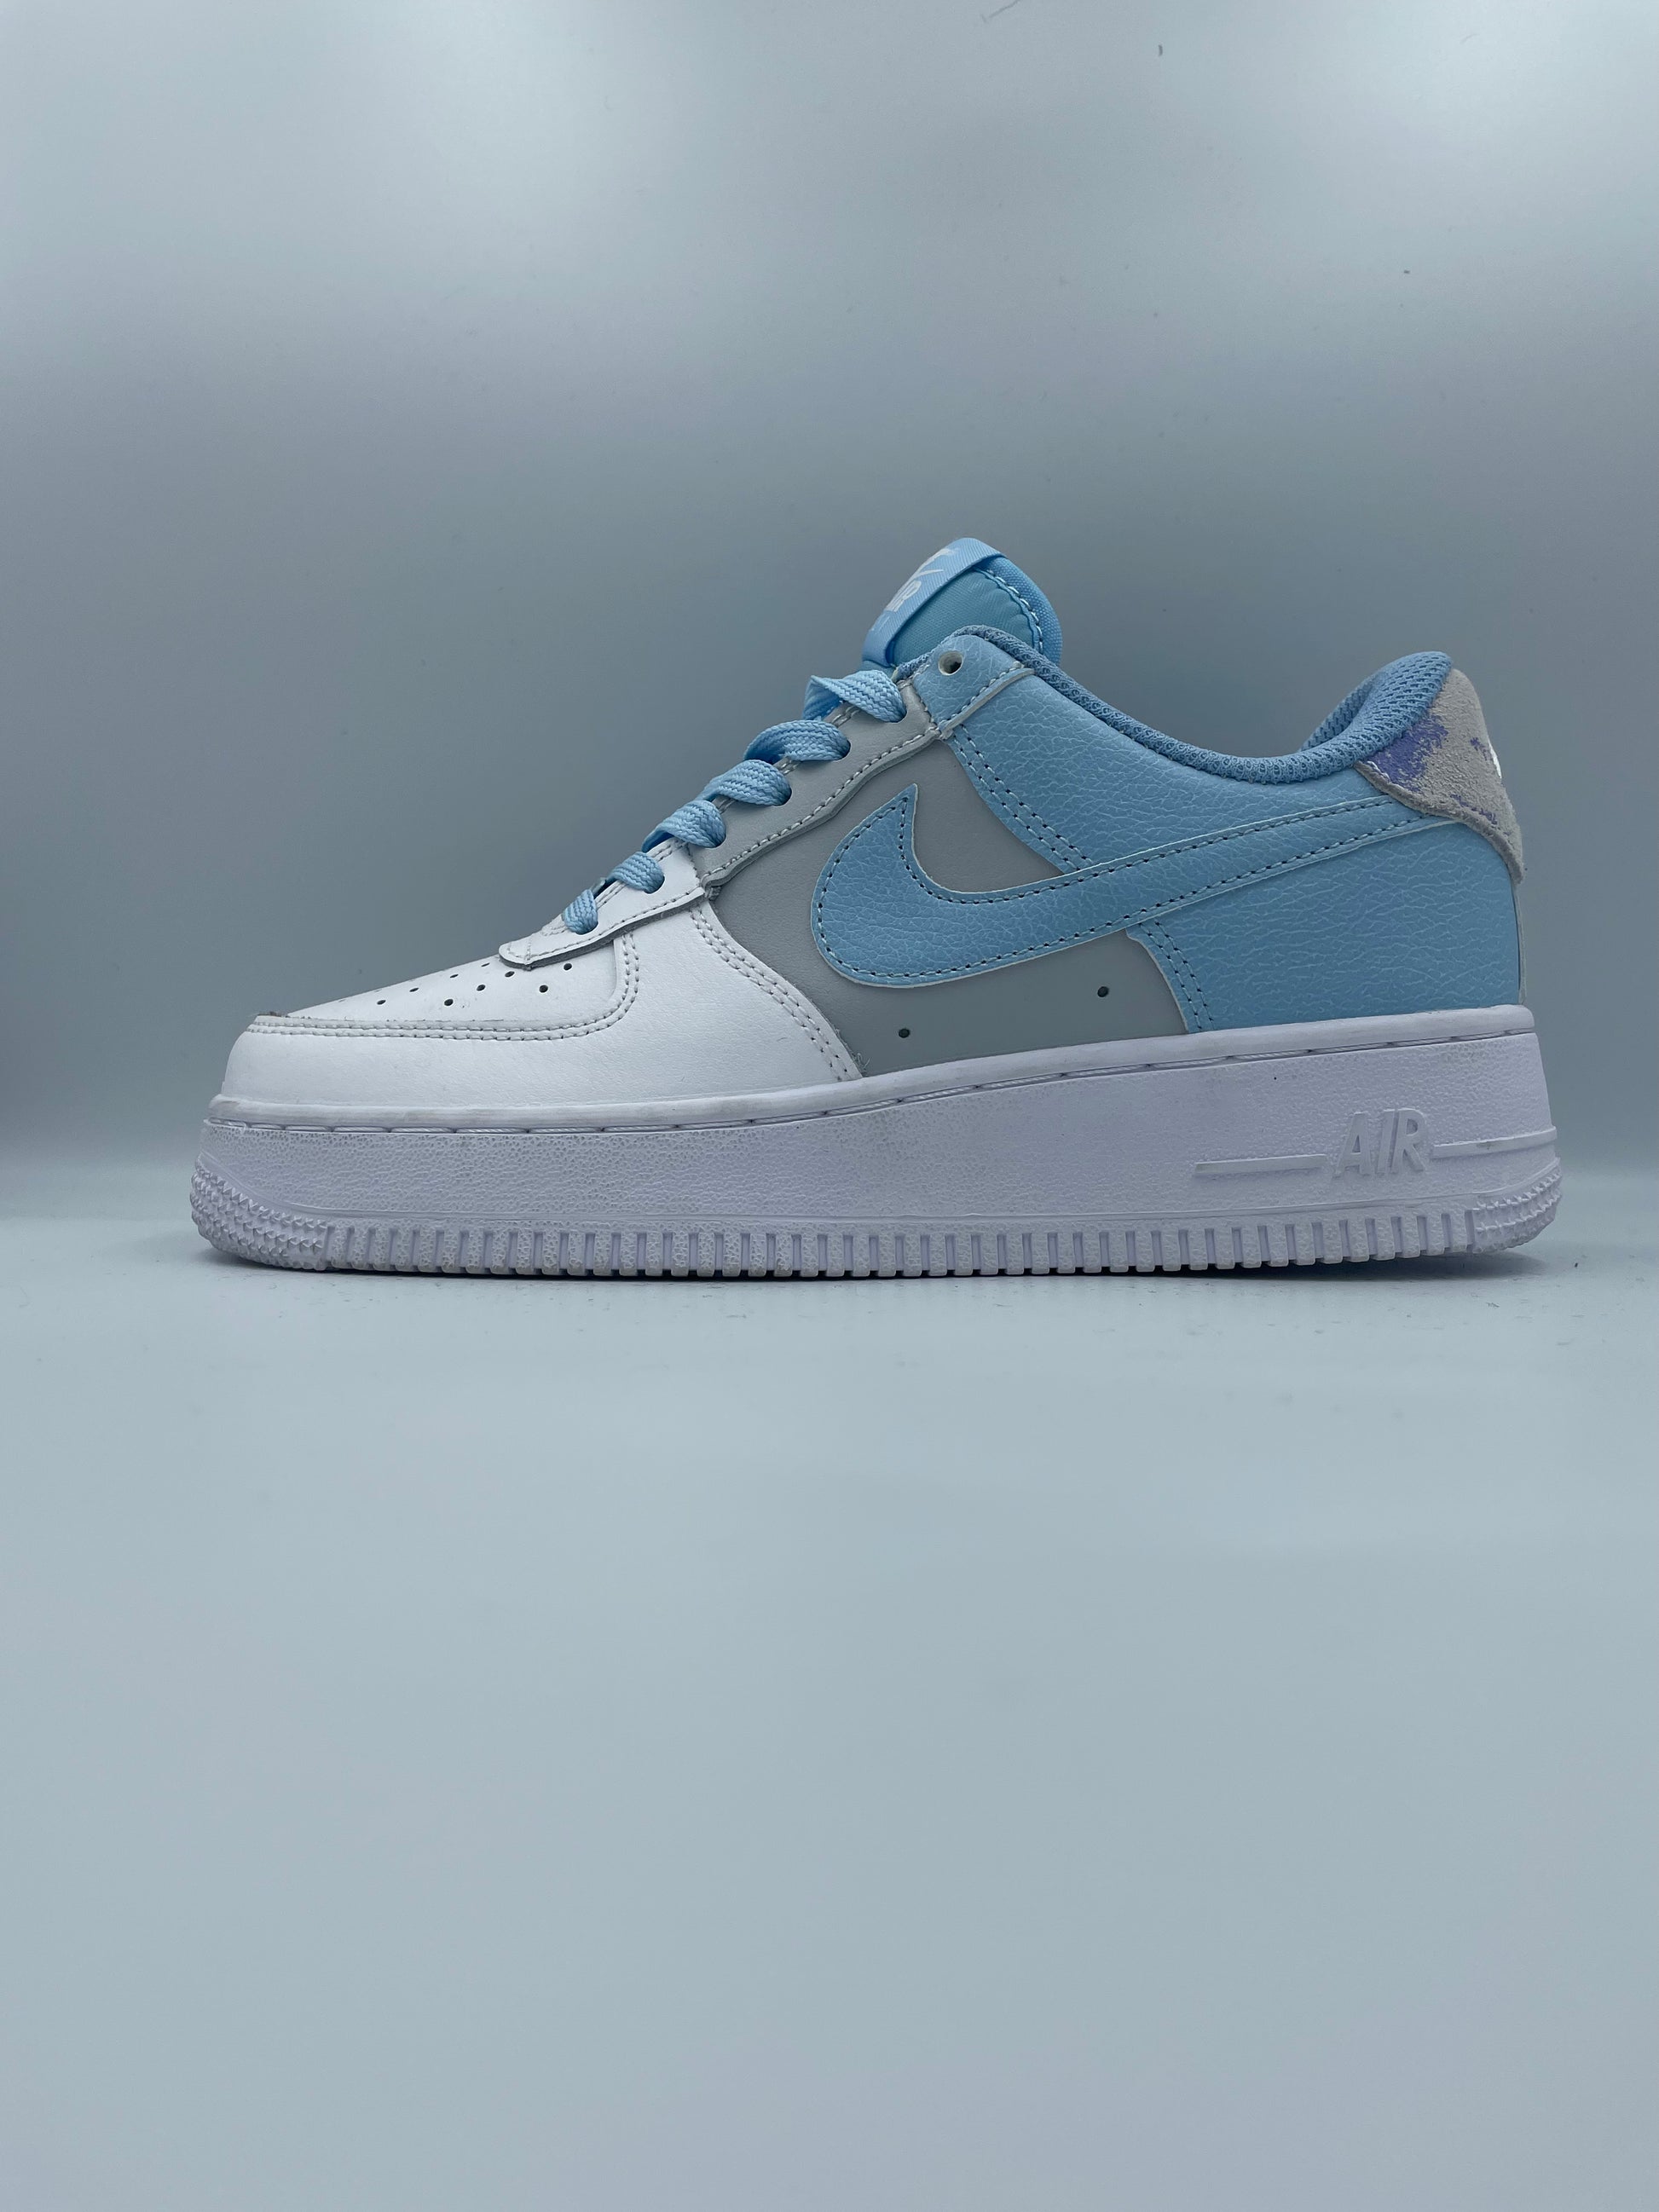 Nike Air Force 1 07 LV8 Psychic Blue Shoes